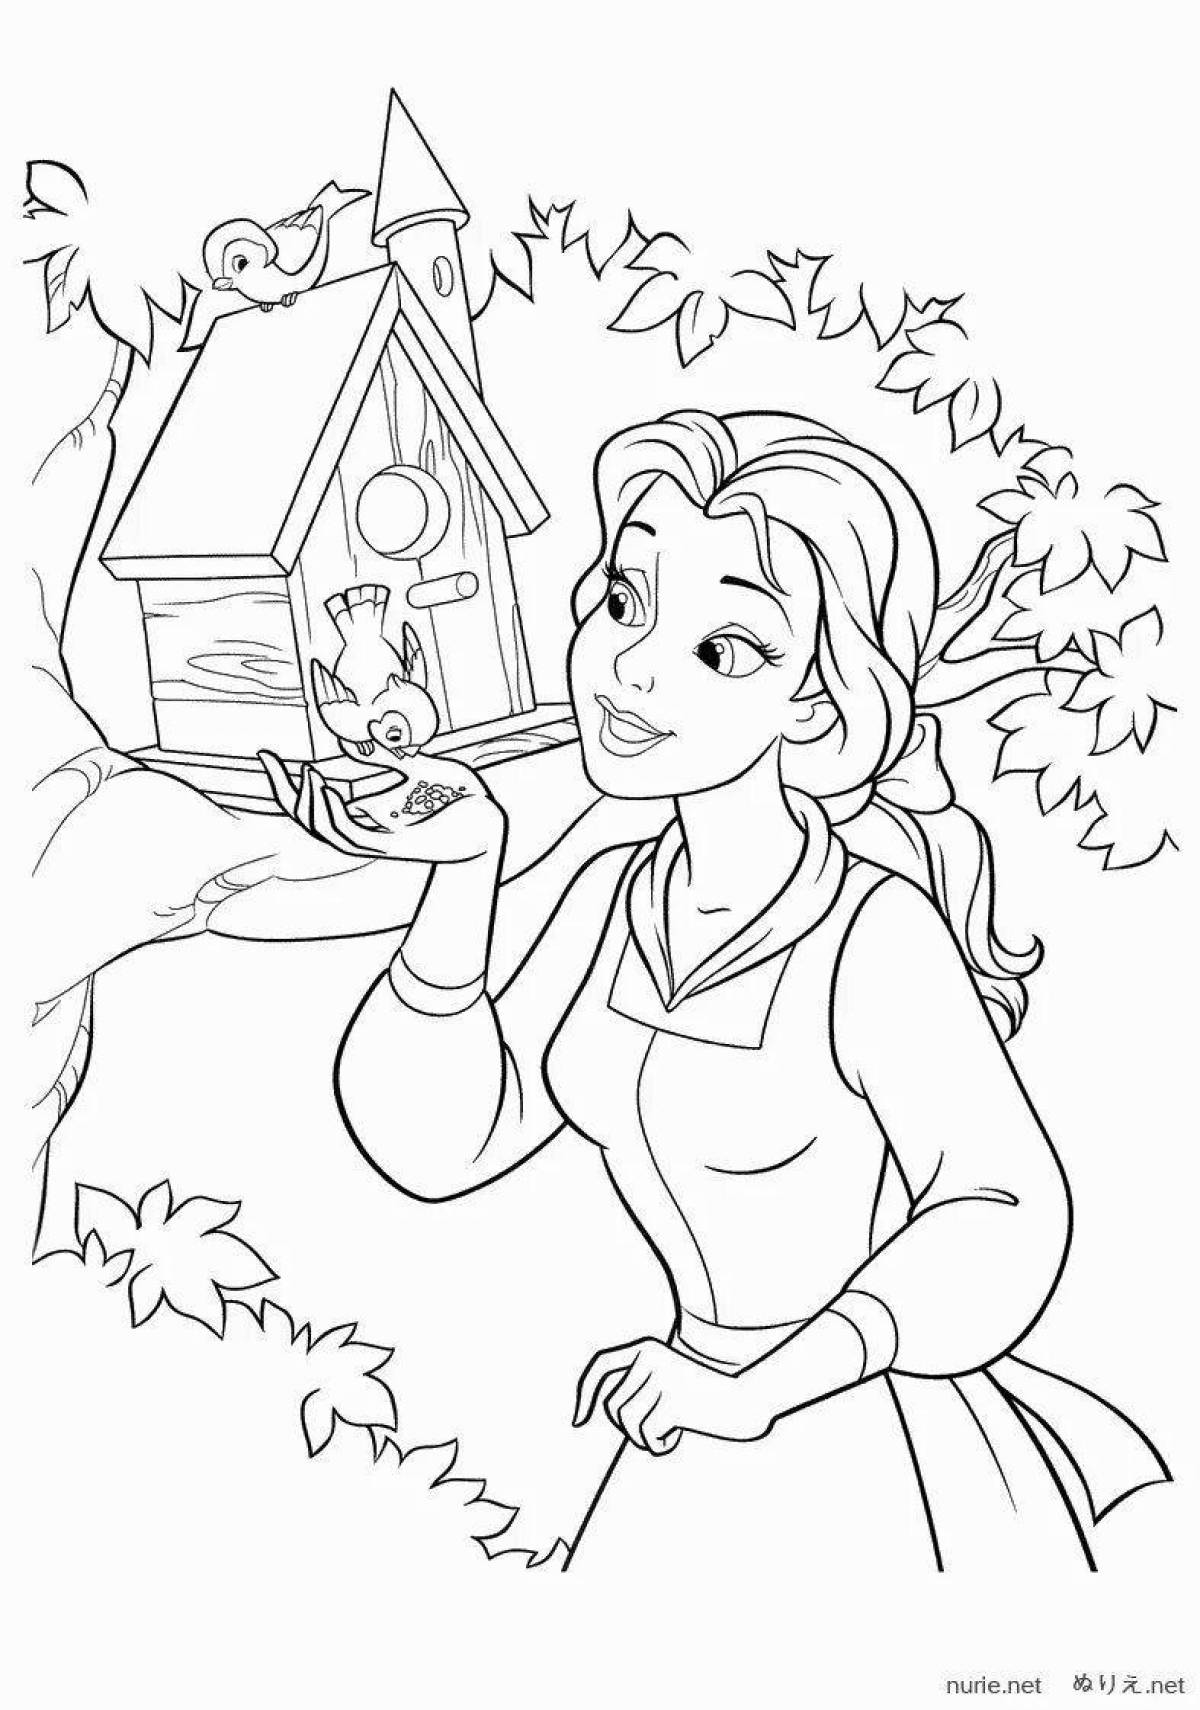 Adorable belle and monster coloring page